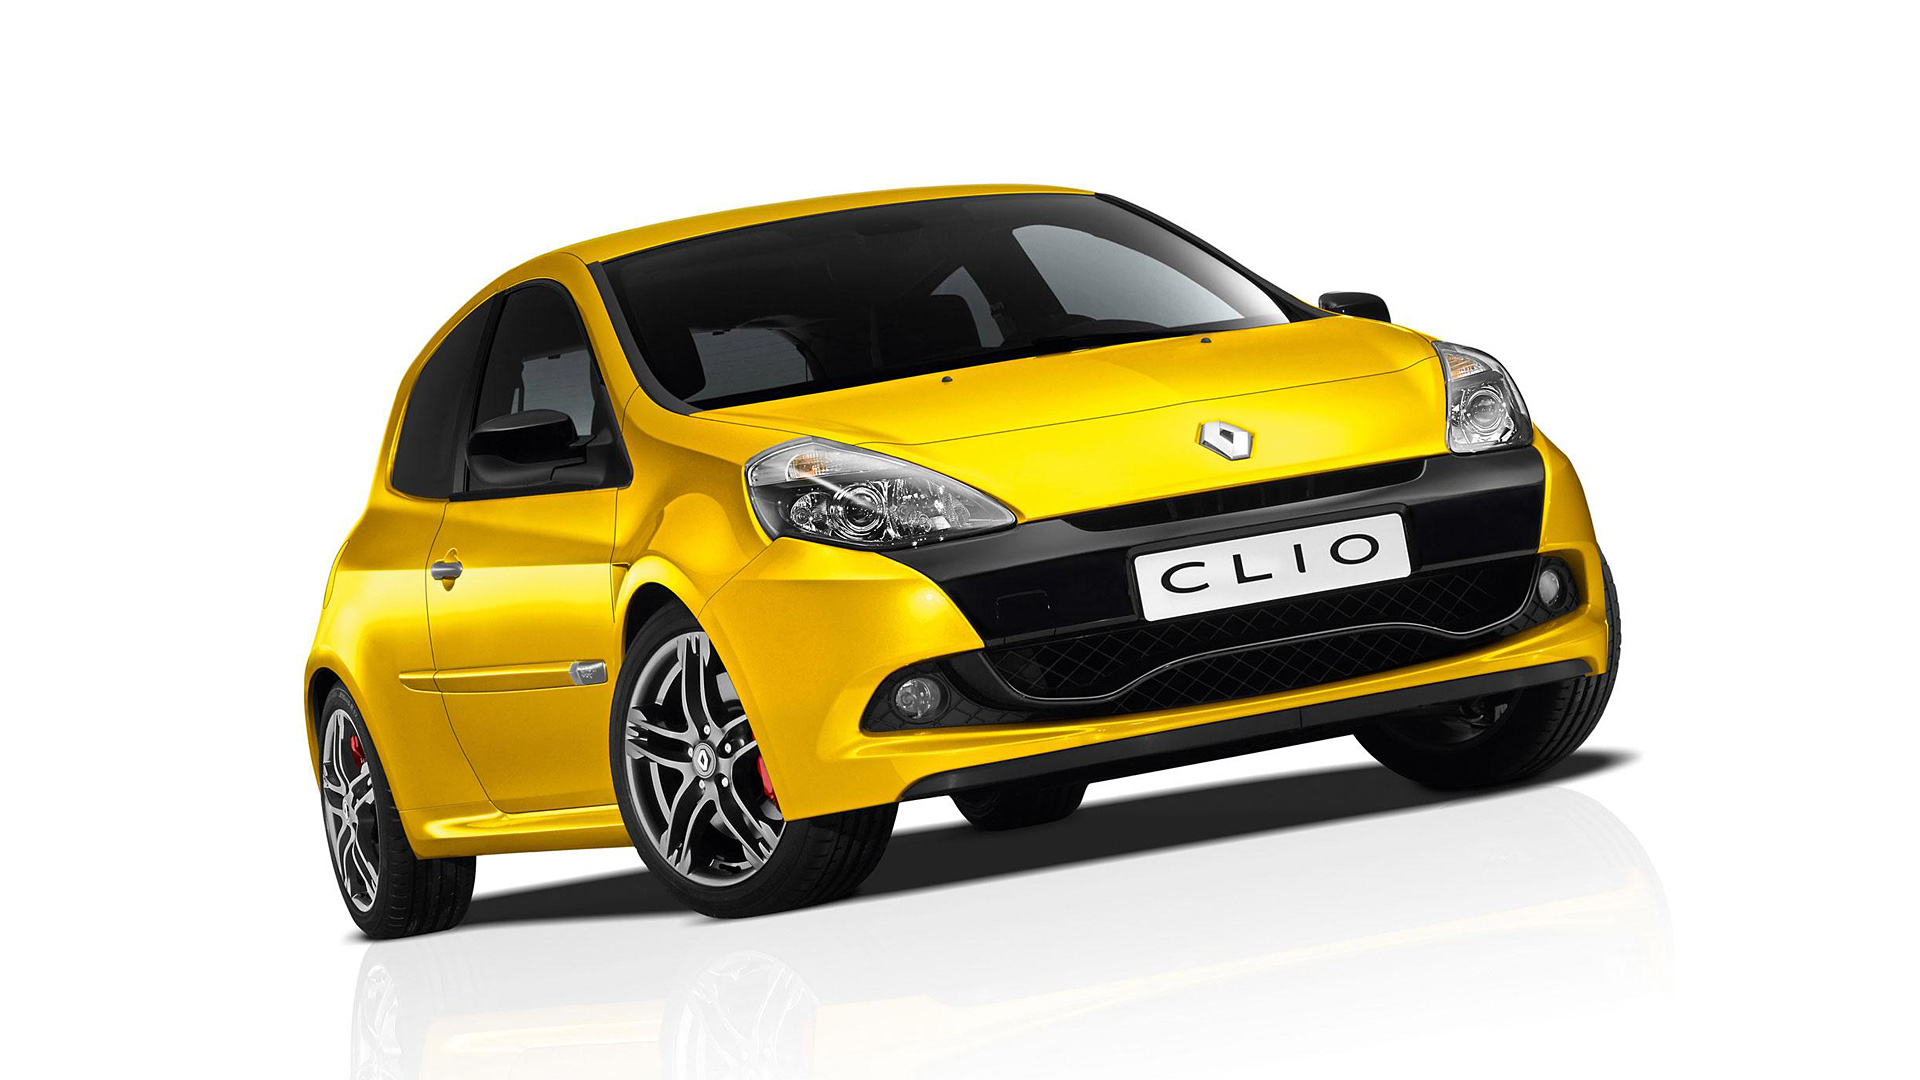  2010 Renault Clio RS Wallpaper.